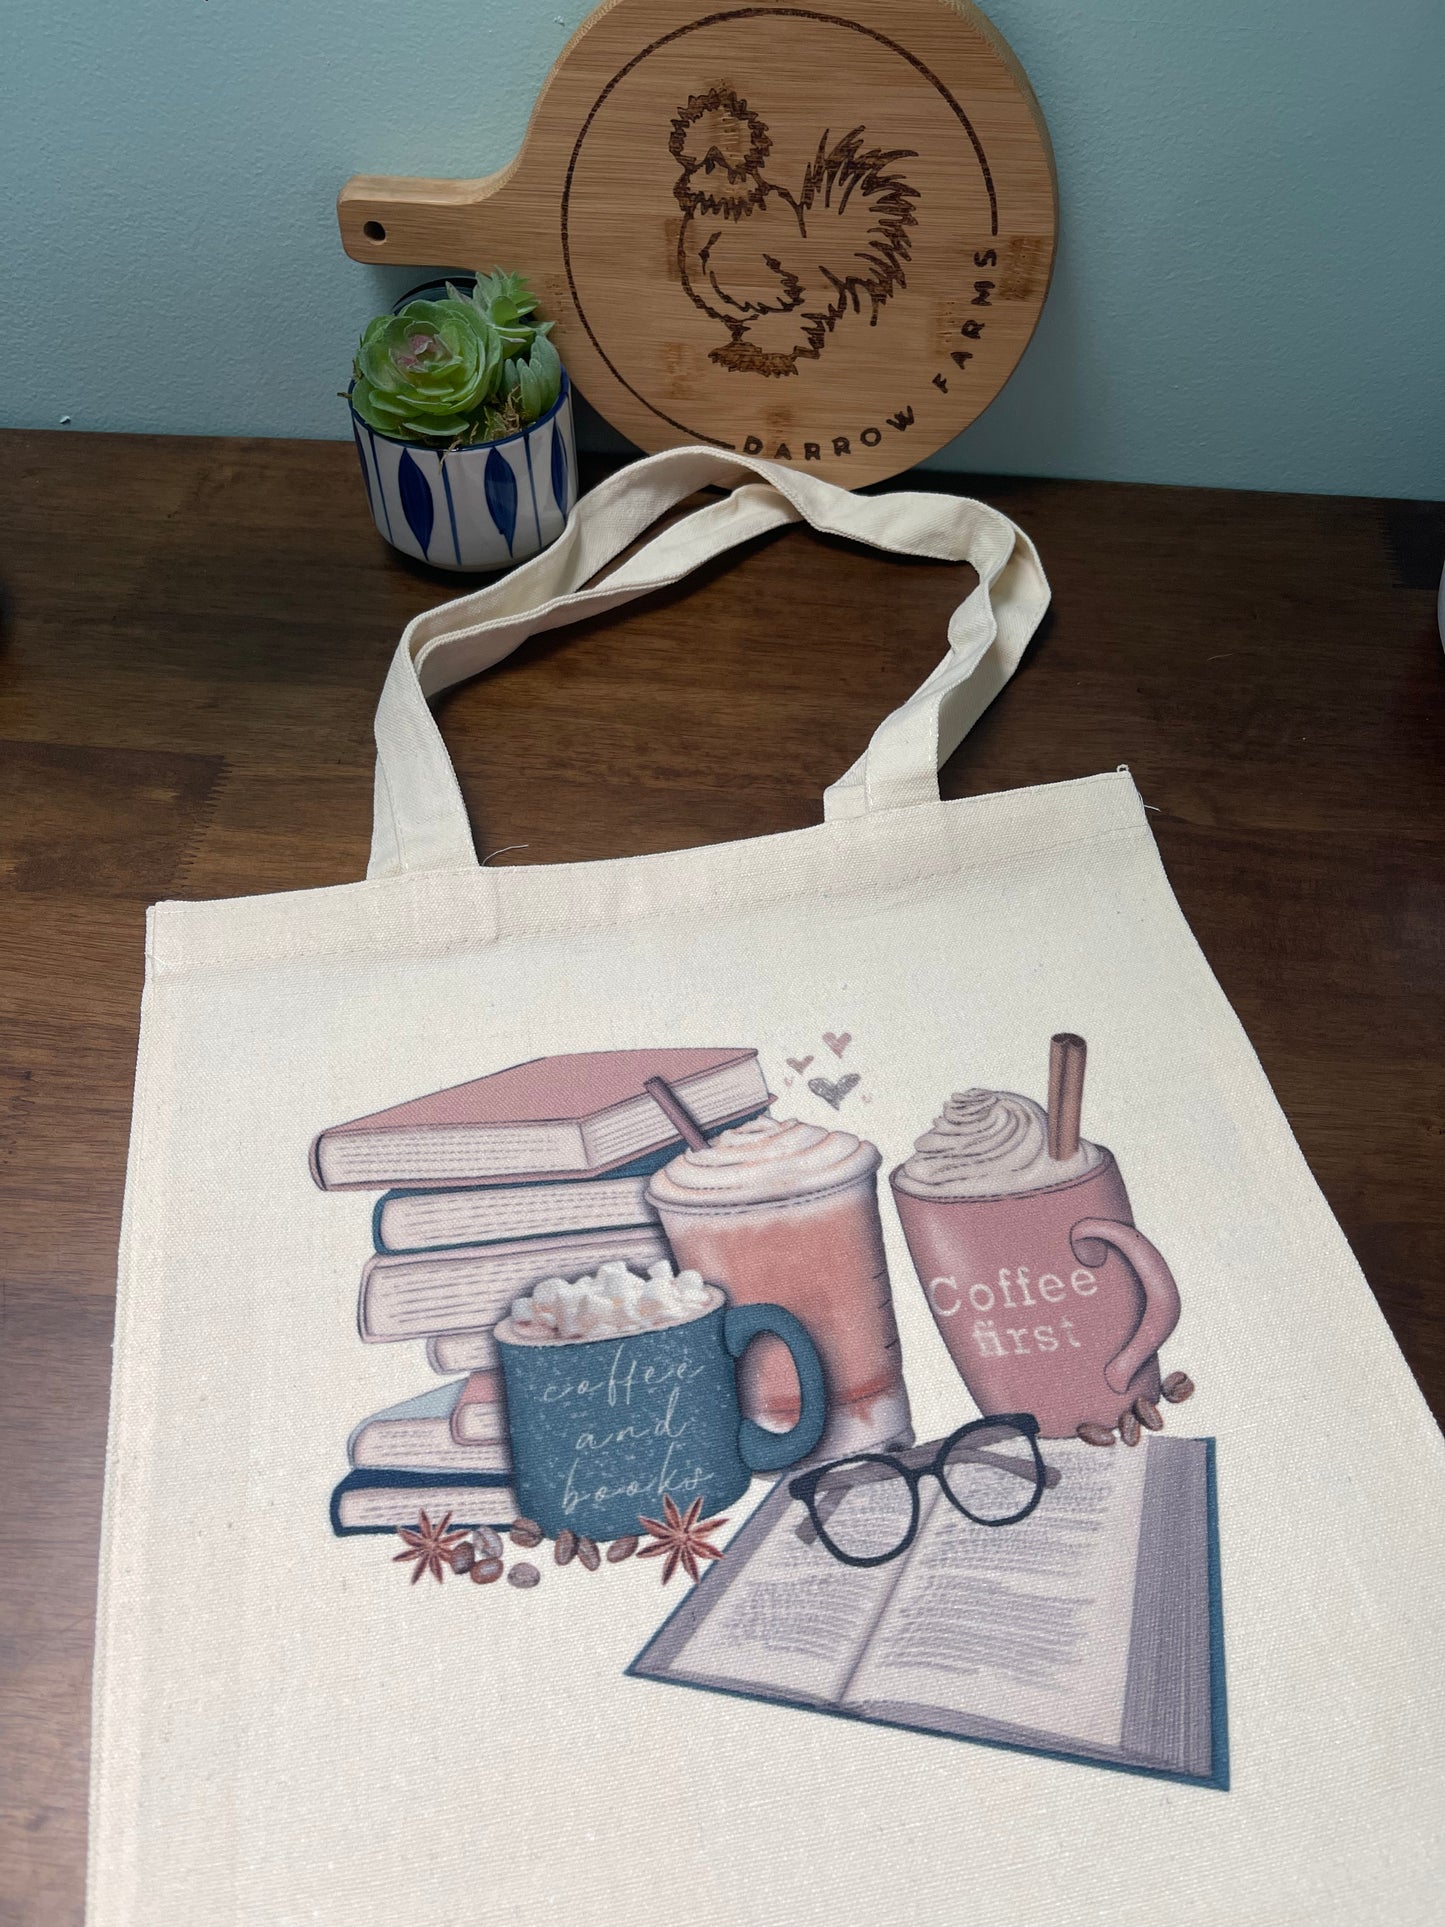 Books and Coffee Tote